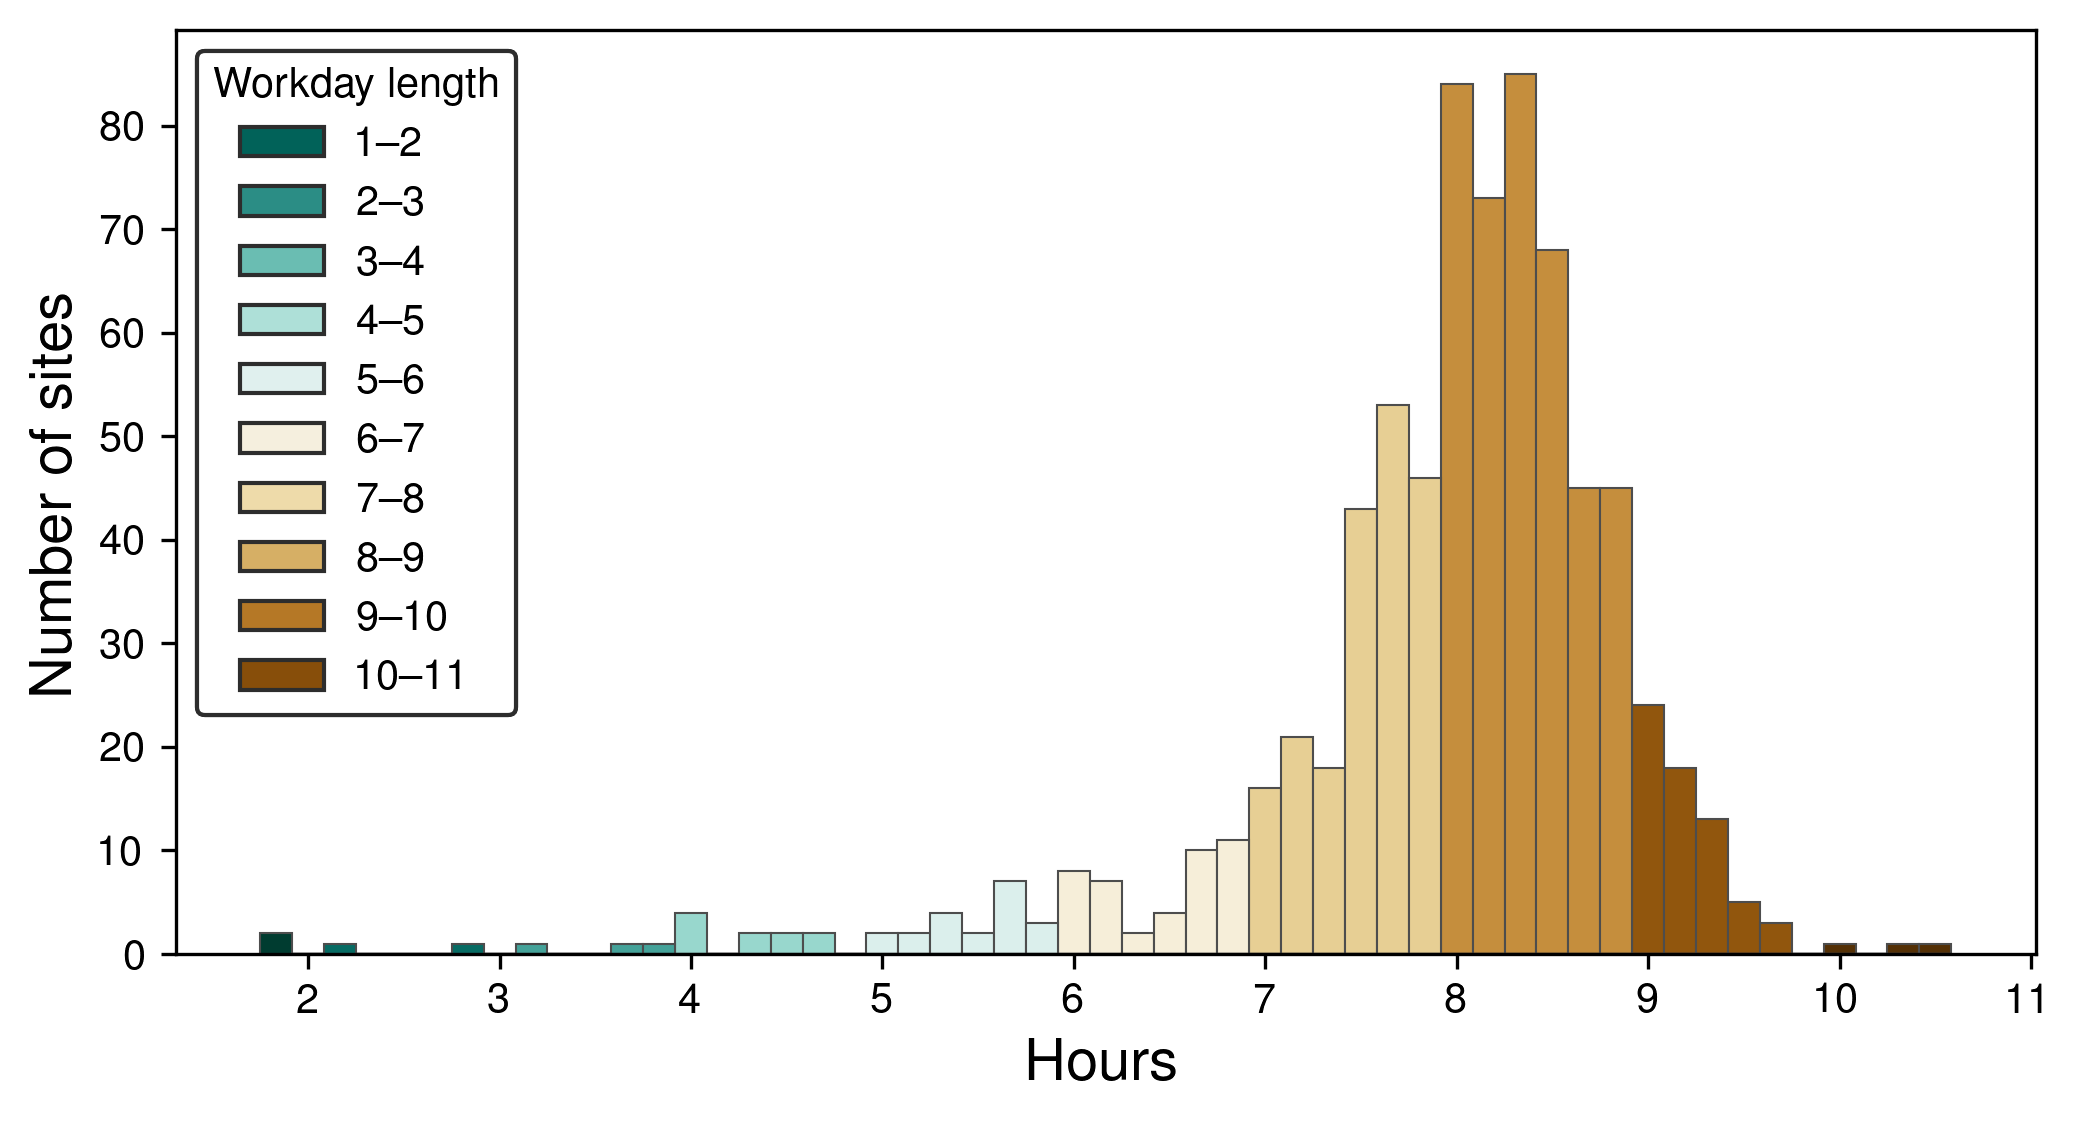 Distribution of workday length in sites.